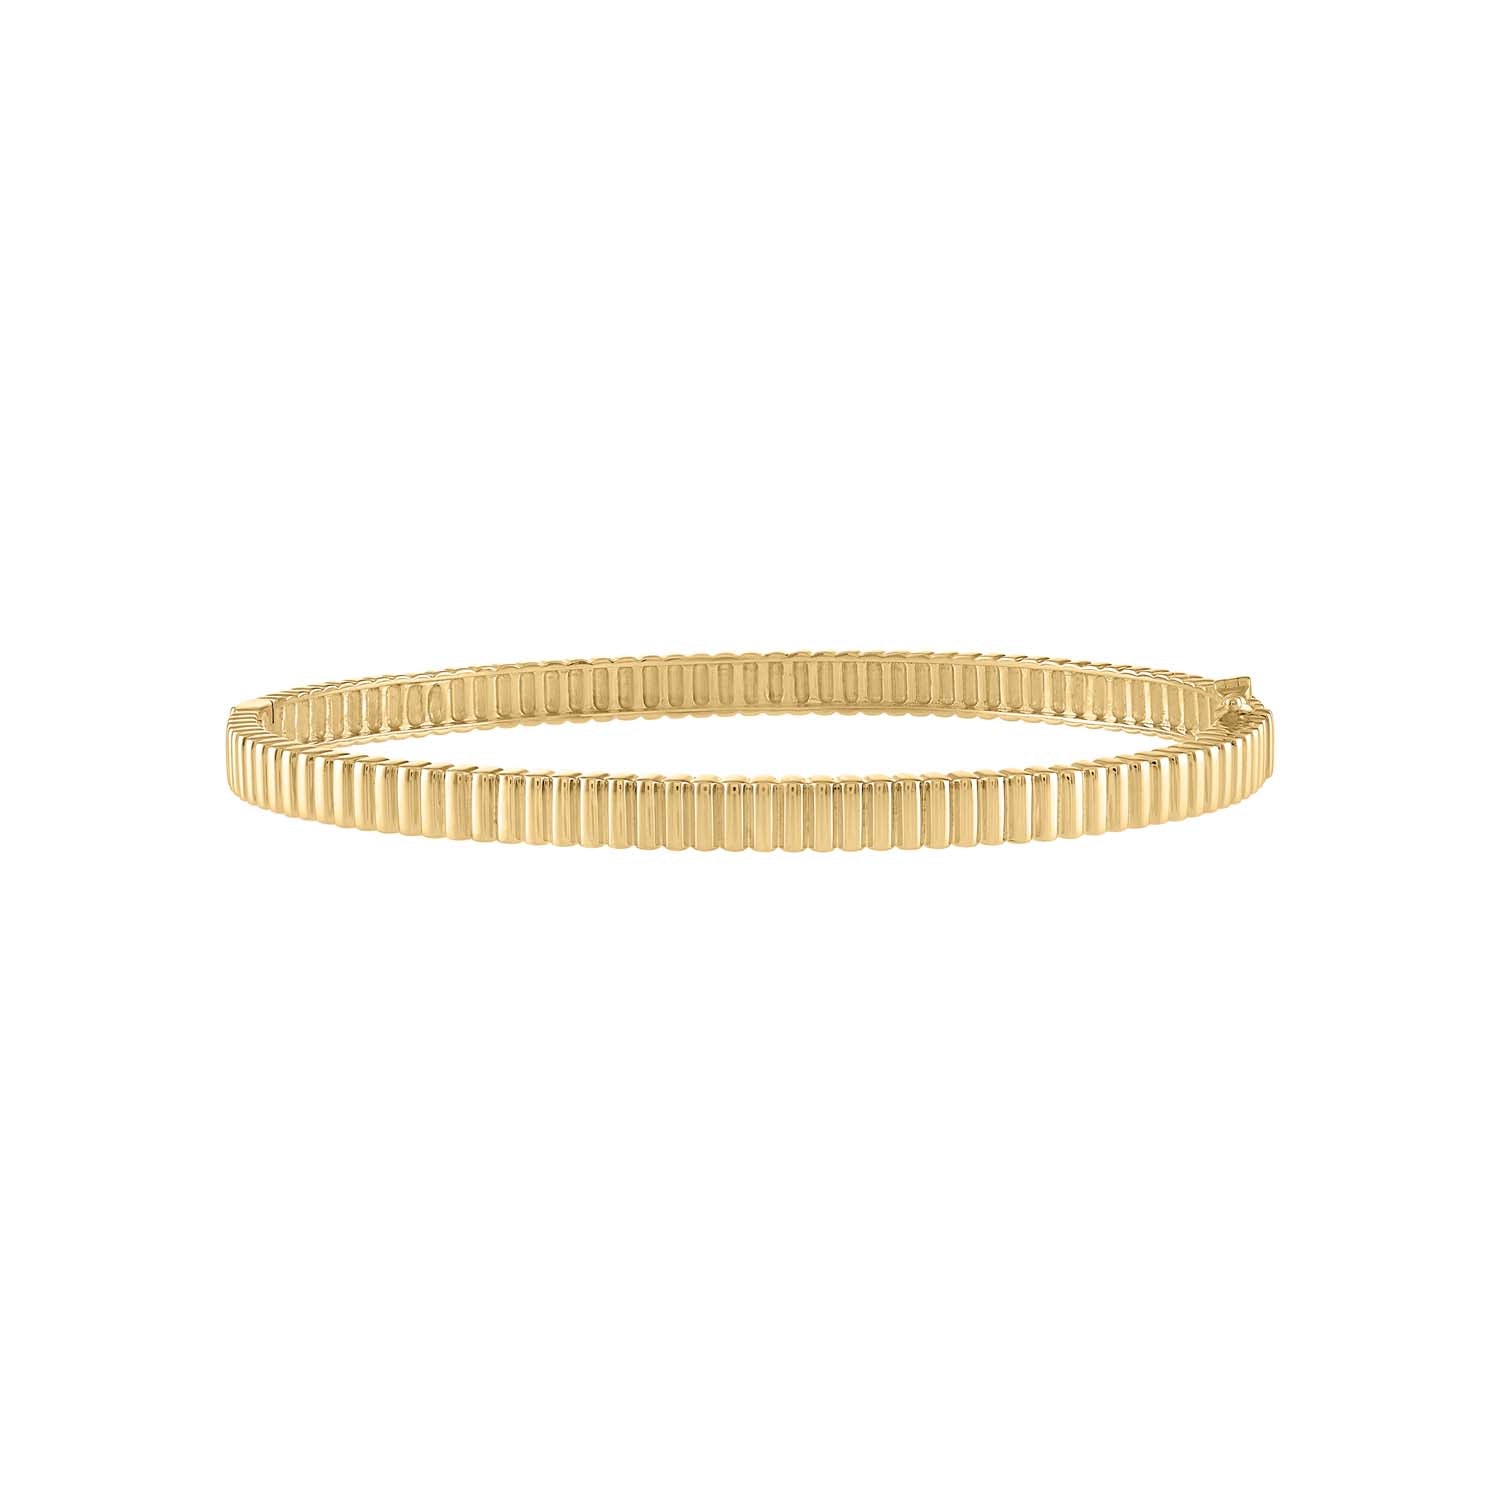 Mia by Tanishq Mia by Tanishq 14KT Yellow Gold A Bangle That Carries The  Colours Of Spring Yellow Gold 14kt Bangle Price in India - Buy Mia by  Tanishq Mia by Tanishq